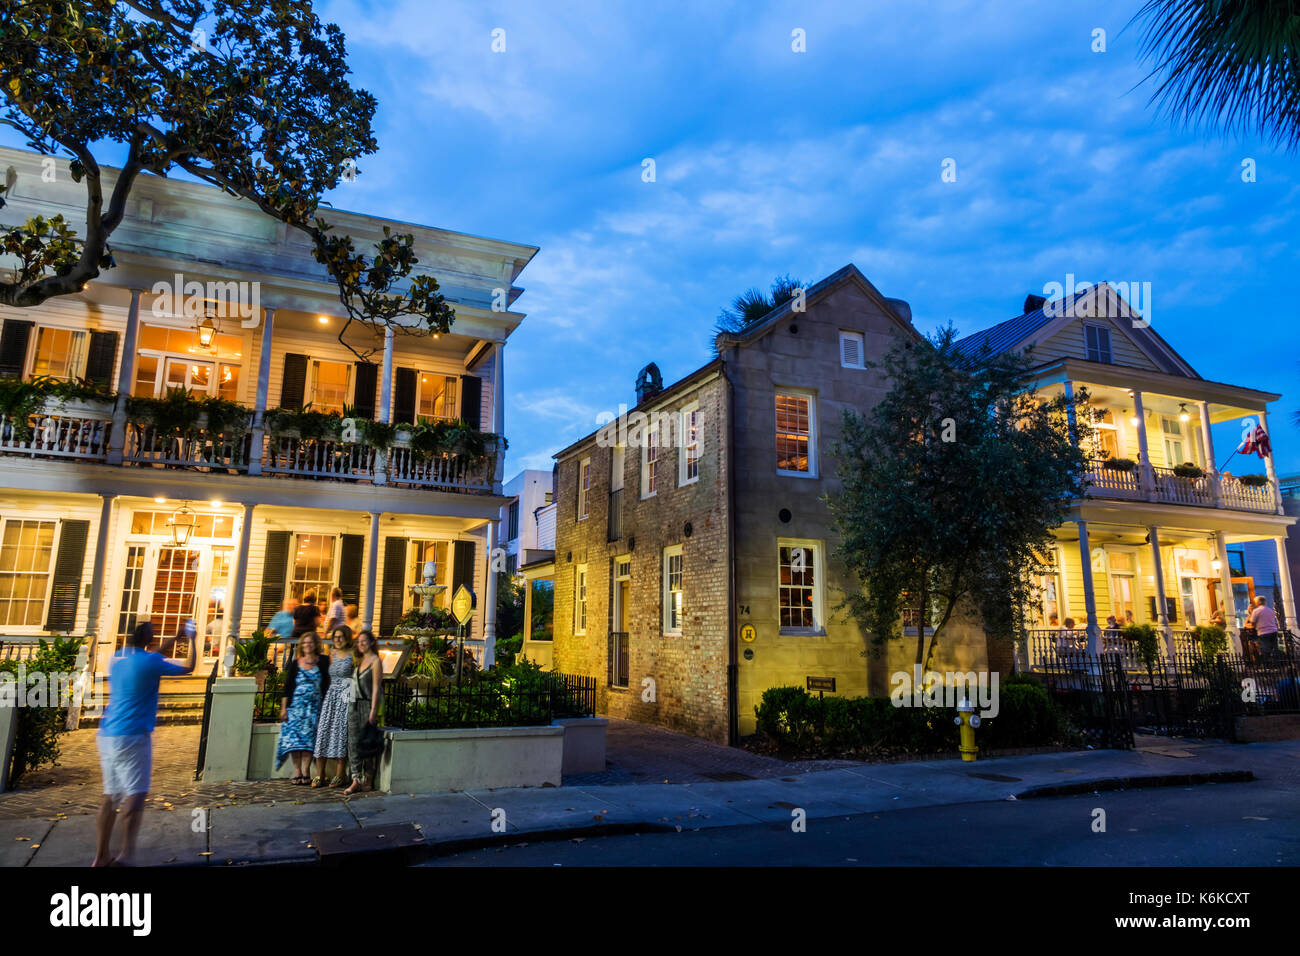 Charleston South Carolina,historic Downtown,Queen Street,Poogan's Porch,Husk,southern cuisine,restaurant restaurants food dining cafe cafes,dining,dus Stock Photo